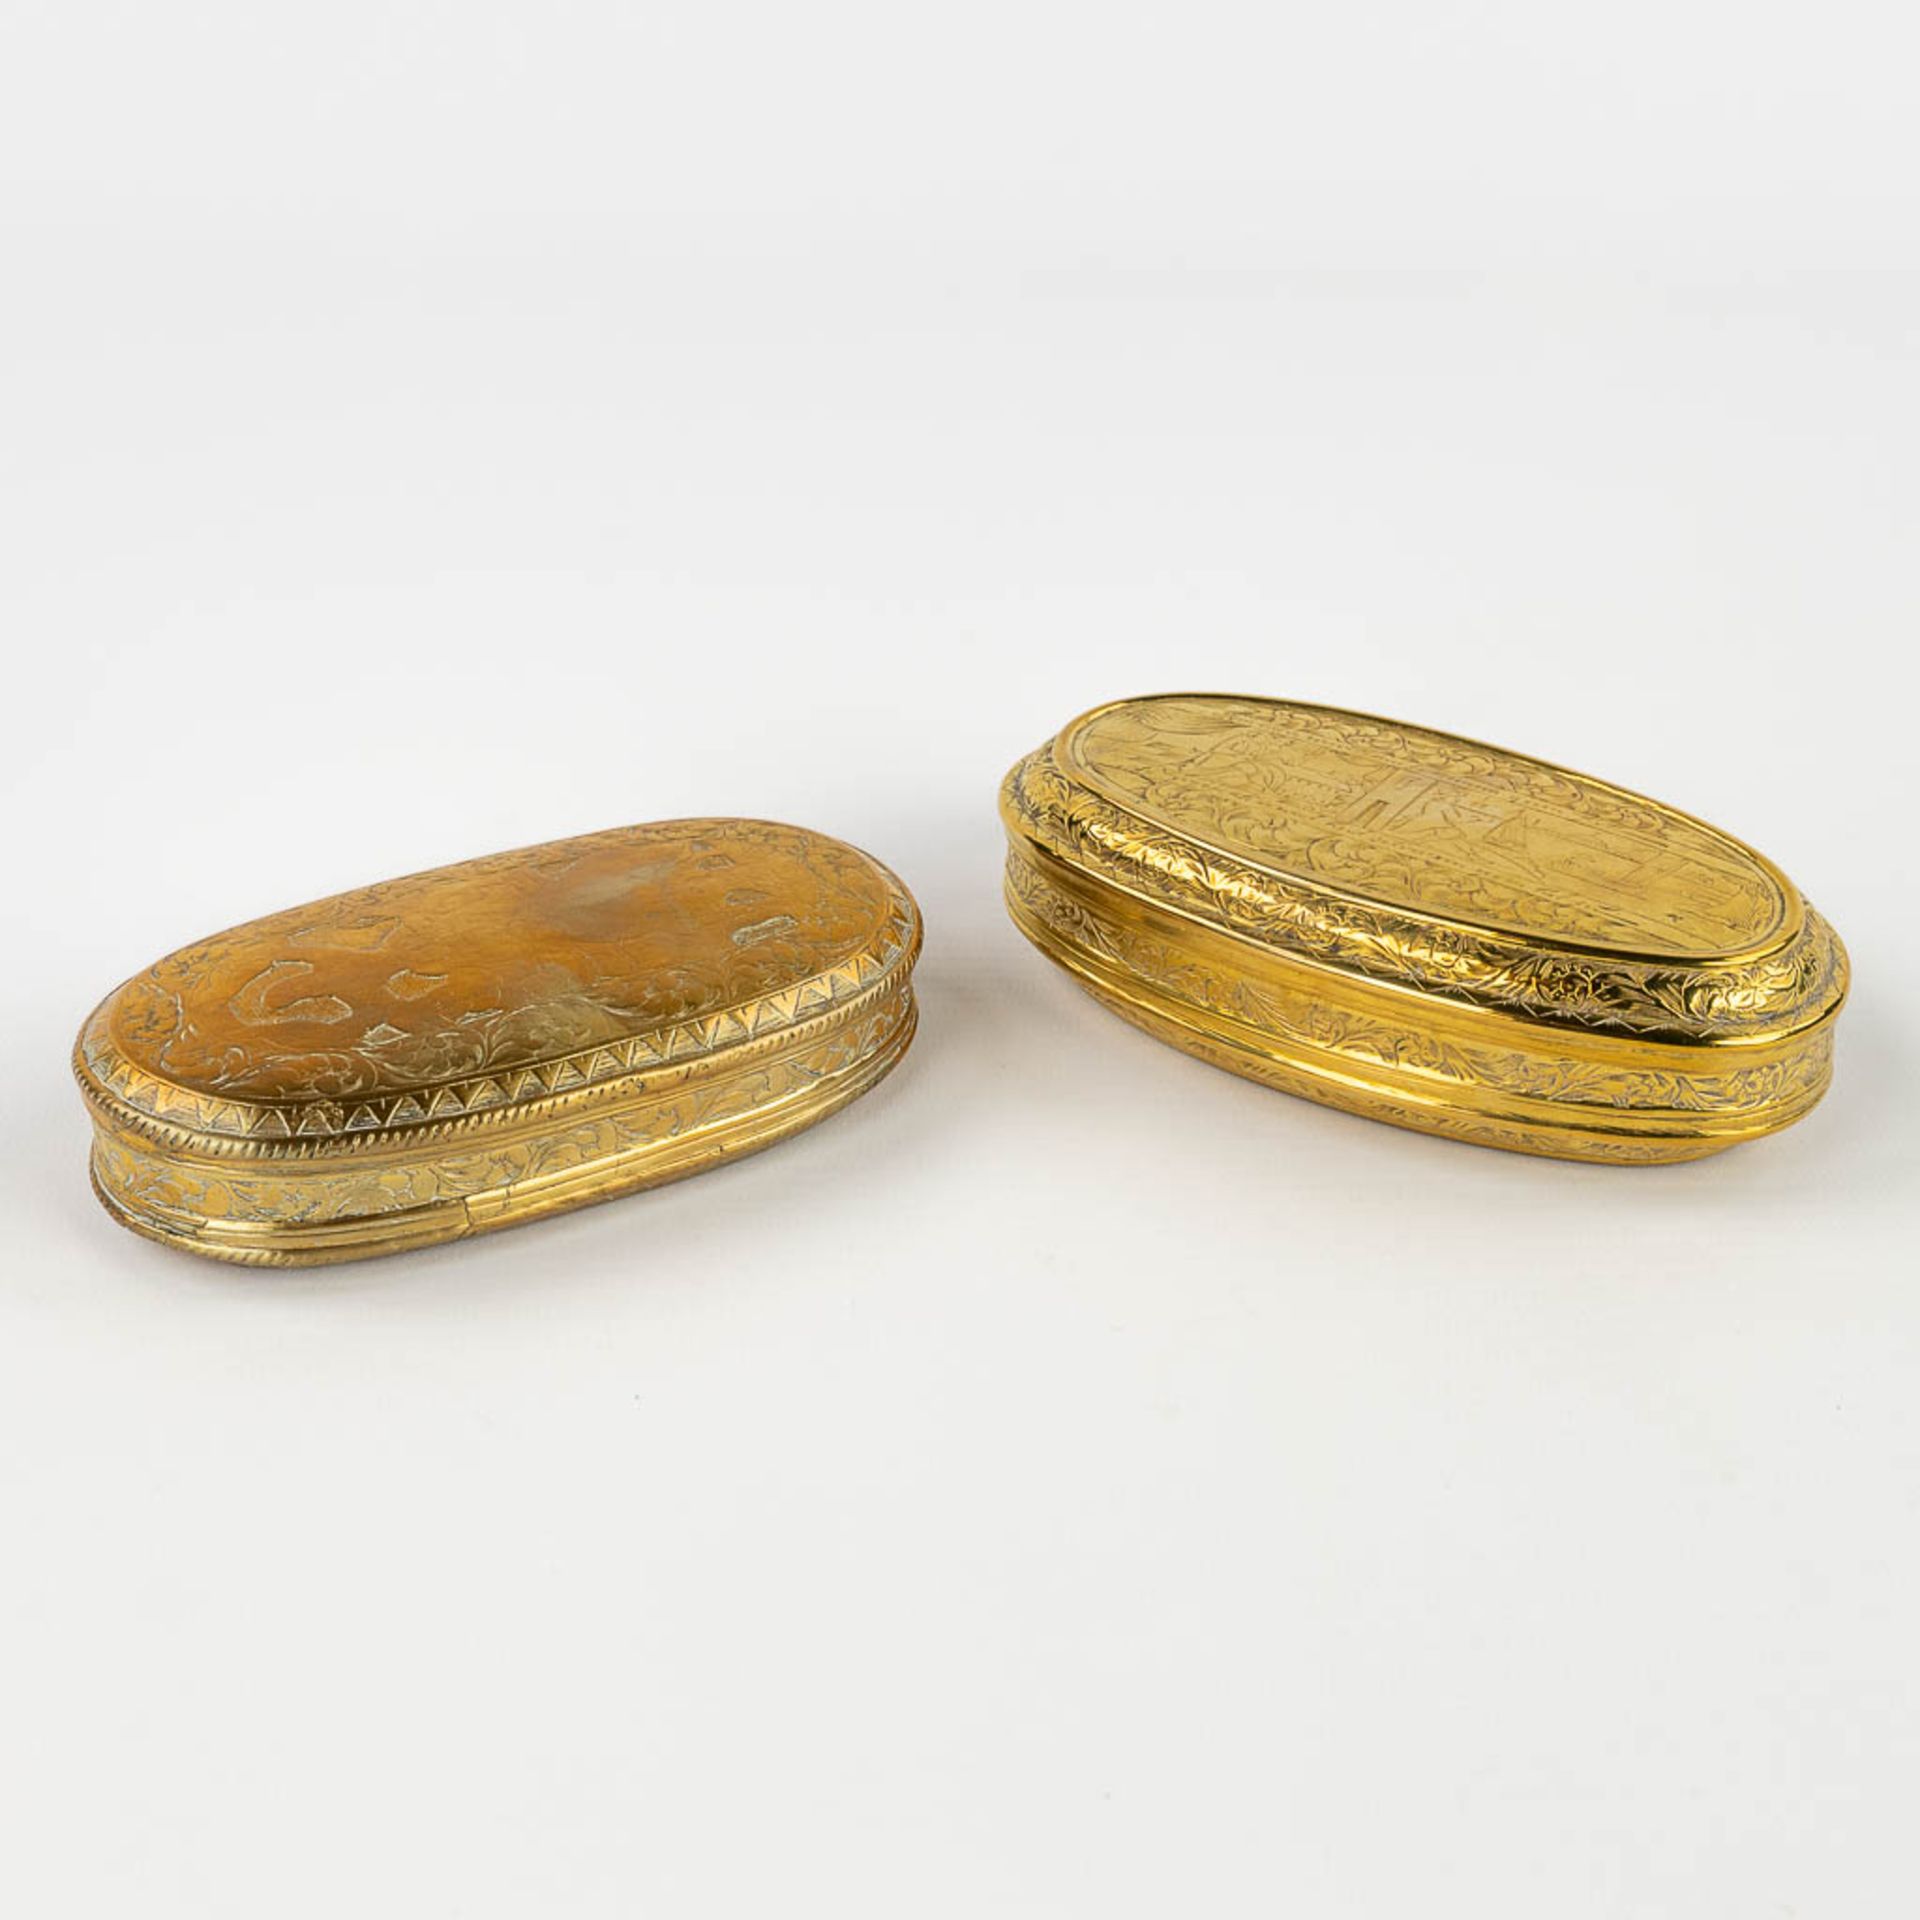 A collection of 2 antique tobacco boxes, made of copper. 18th C. (L: 7,5 x W: 13,7 x H: 3,7 cm) - Image 3 of 23